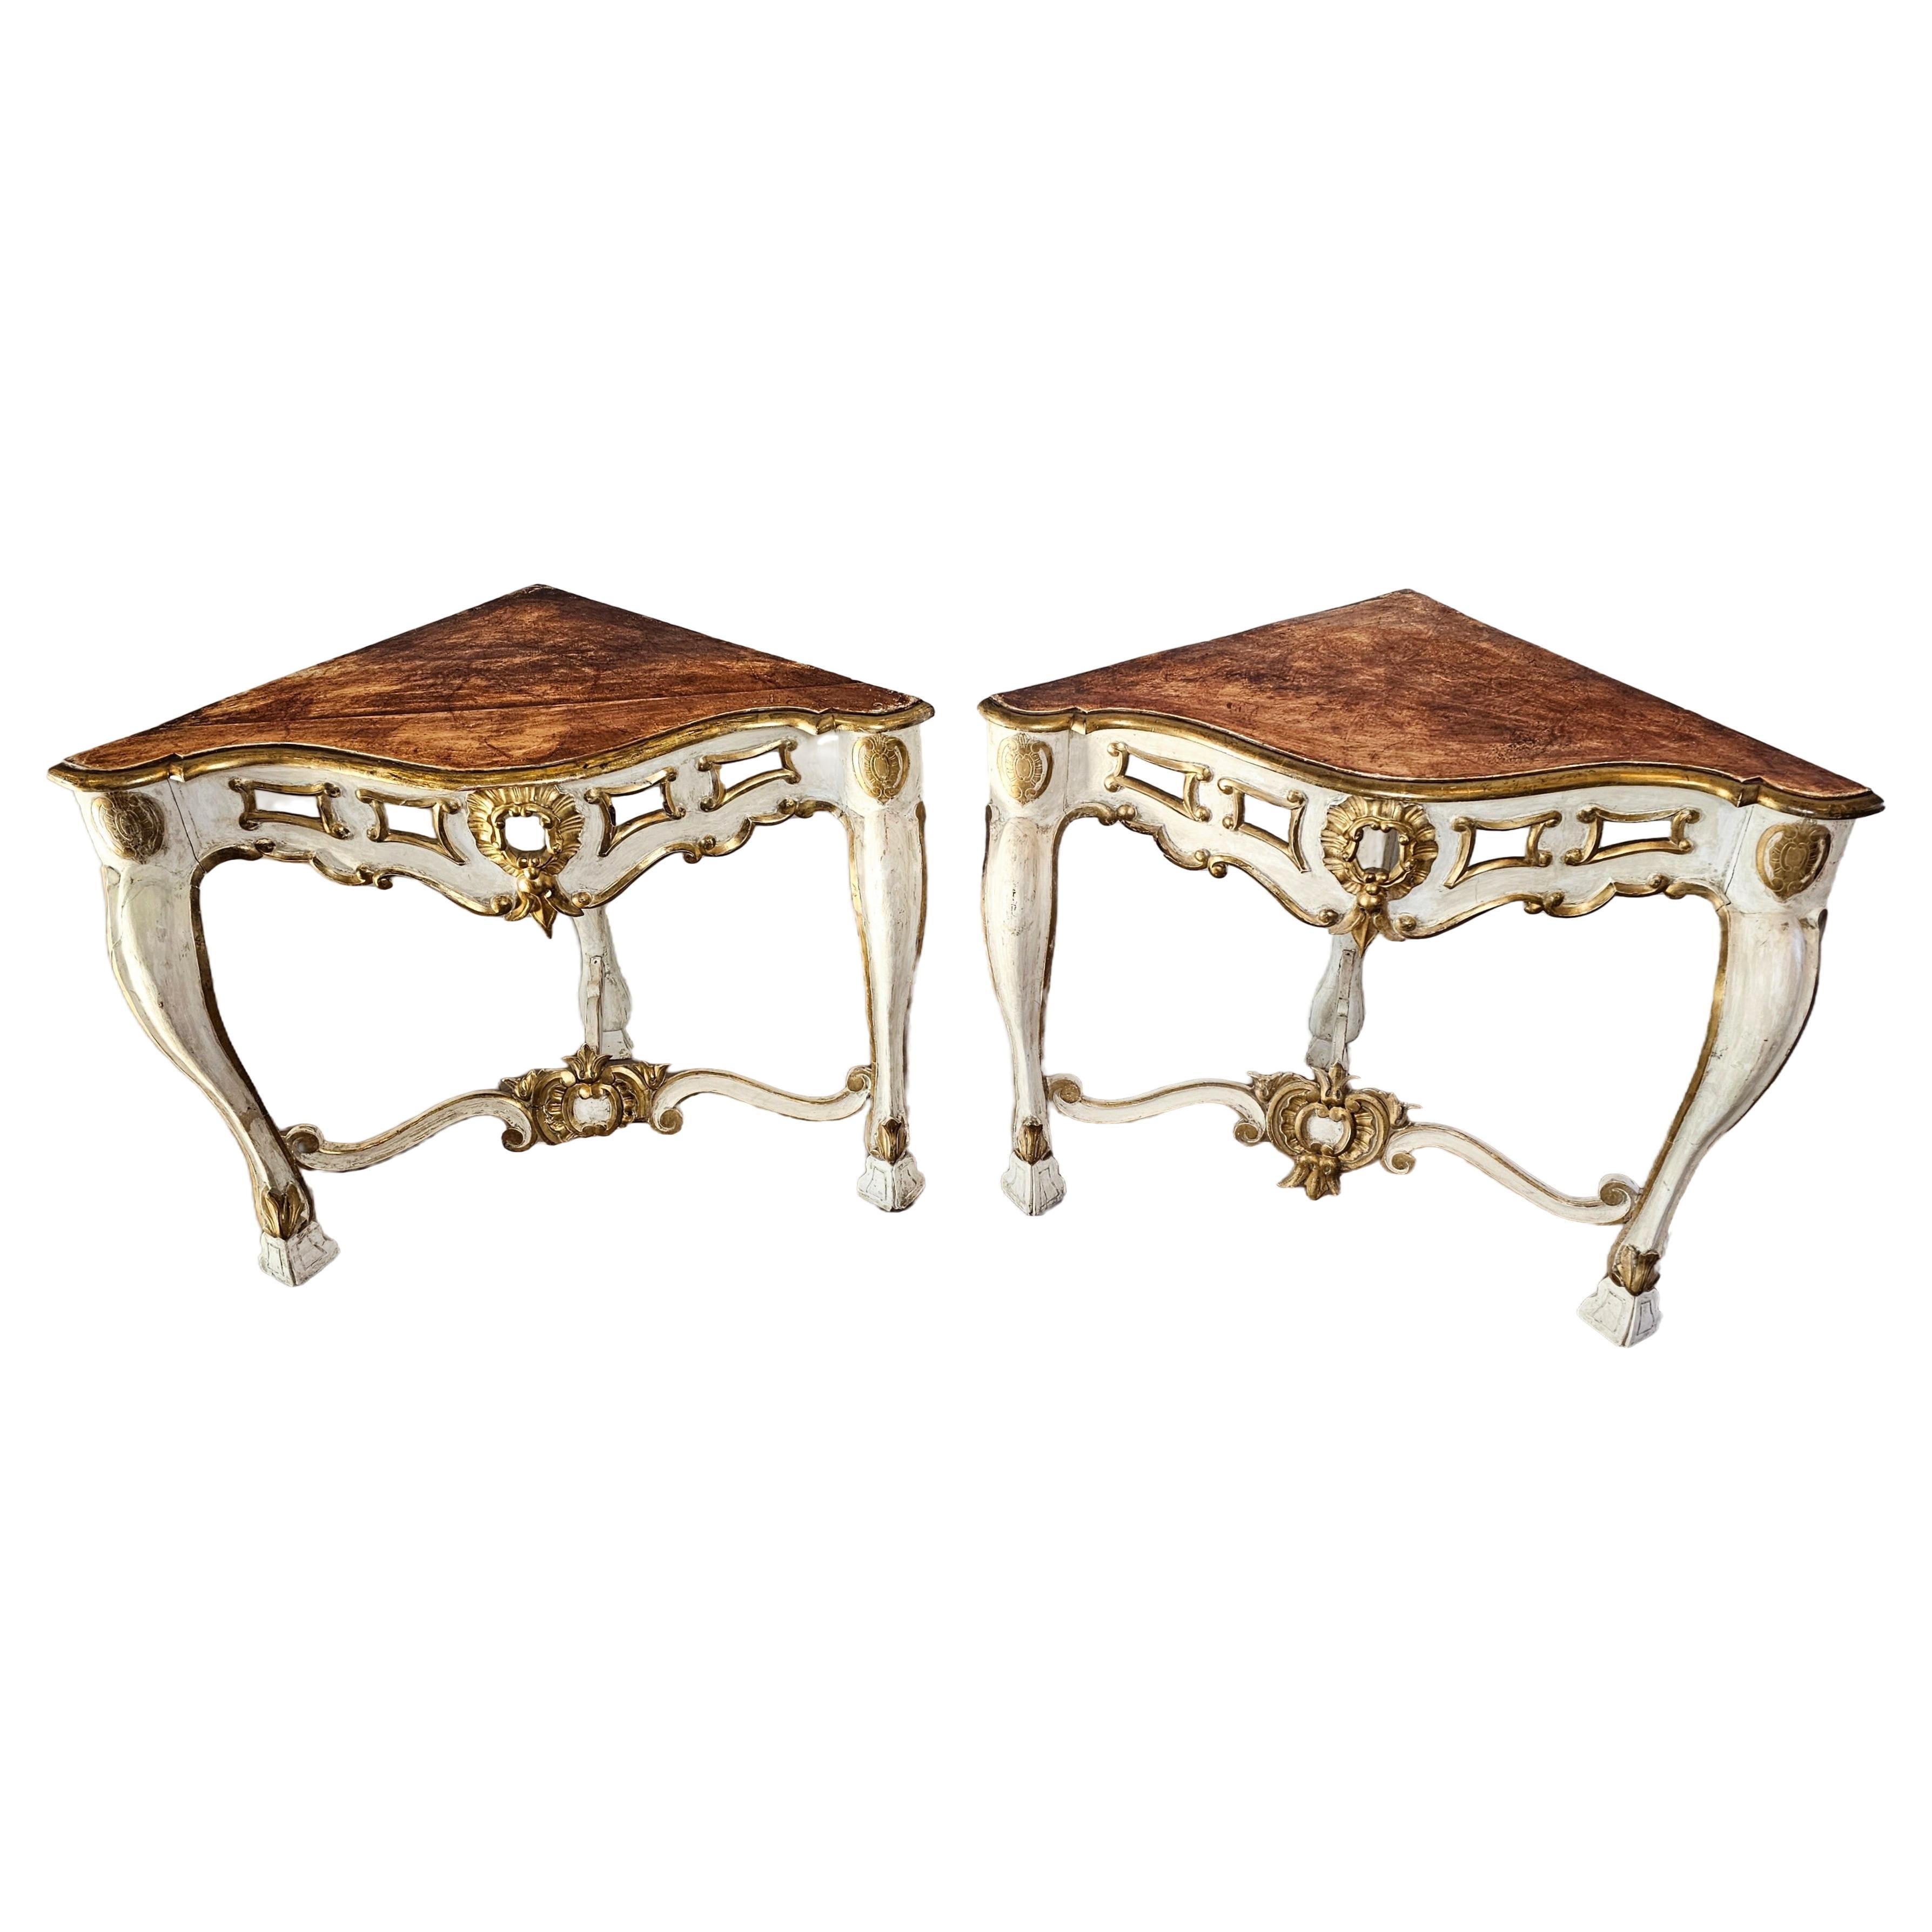 18th Century Italian Louis XV Carved Painted Gilt Wood Corner Console Table Pair For Sale